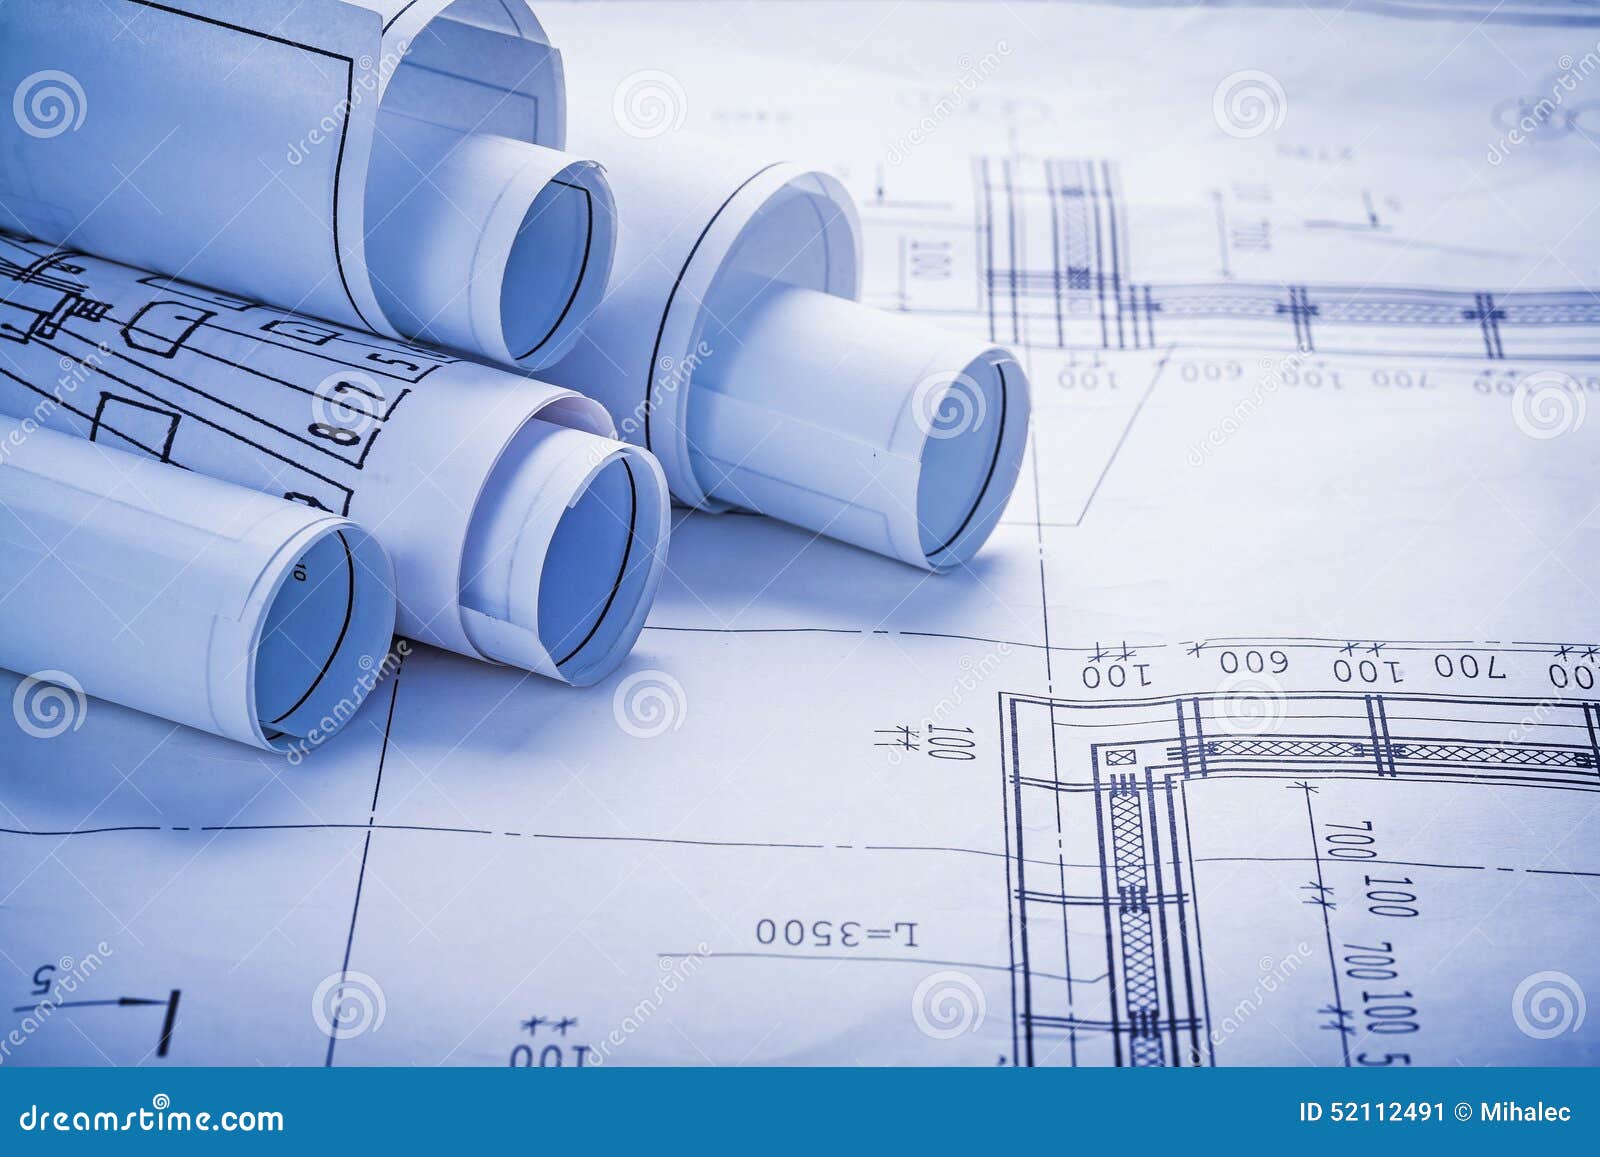 Small Stack Of White Rolled Up Blueprints Stock Image 